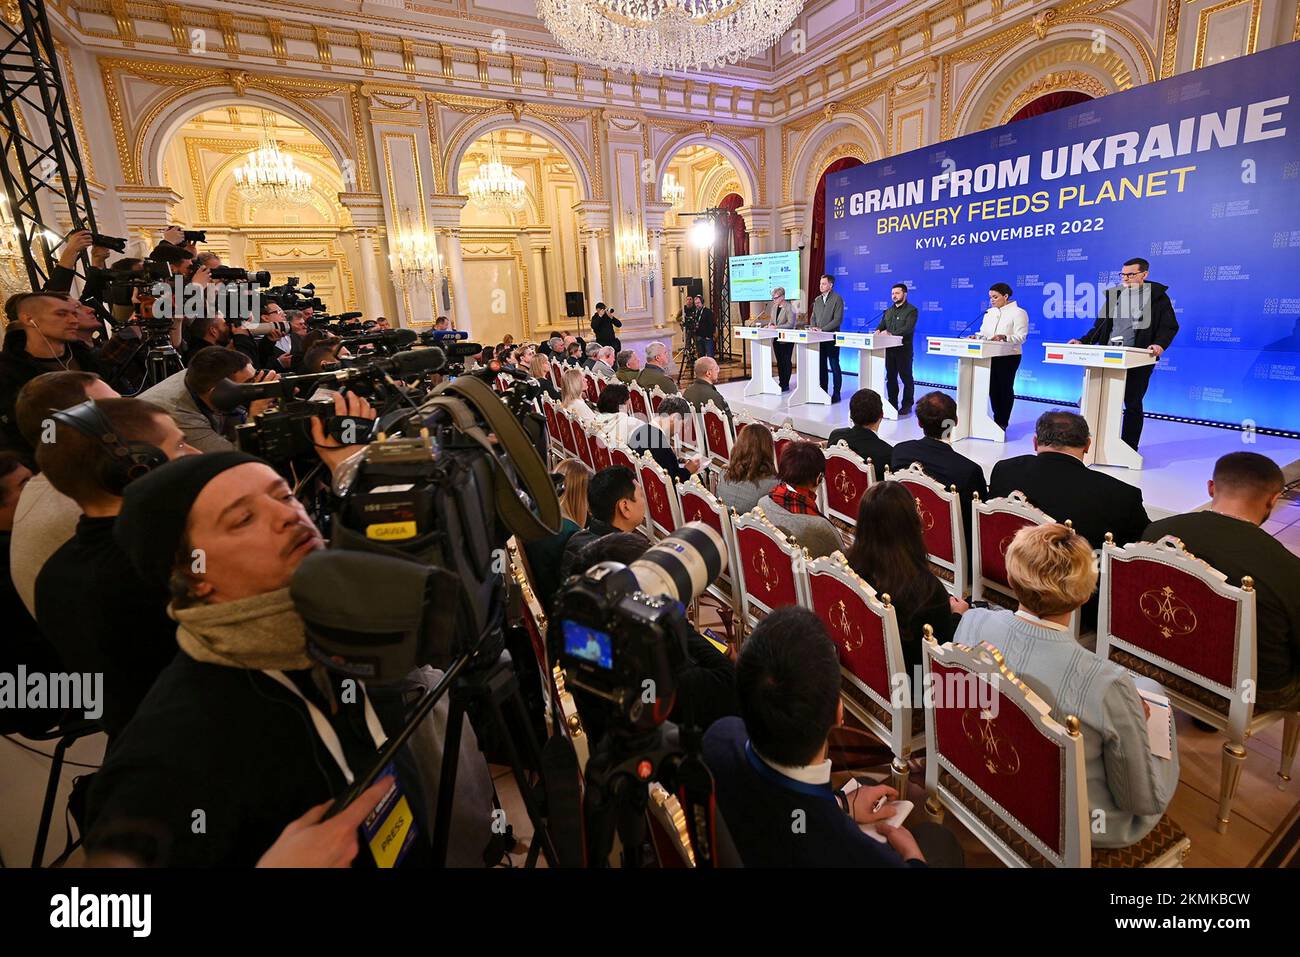 Kyiv, Ukraine. 26 November, 2022. Ukrainian President Volodymyr Zelenskyy, center, listens to a question from the media during the press conference at the conclusion of the inaugural International Summit of Food Security at the Mariinsky Palace, November 26, 2022 in Kyiv, Ukraine. Standing from left to right: Lithuanian Prime Minister Ingrida Simonyte, Belgian Prime Minister Alexander De Croo, Ukrainian President Volodymyr Zelenskyy, Hungarian Prime Minister Katalin Novak, and Polish Prime Minister Mateusz Morawiecki. Credit: Ukraine Presidency/Ukrainian Presidential Press Office/Alamy Live Ne Stock Photo